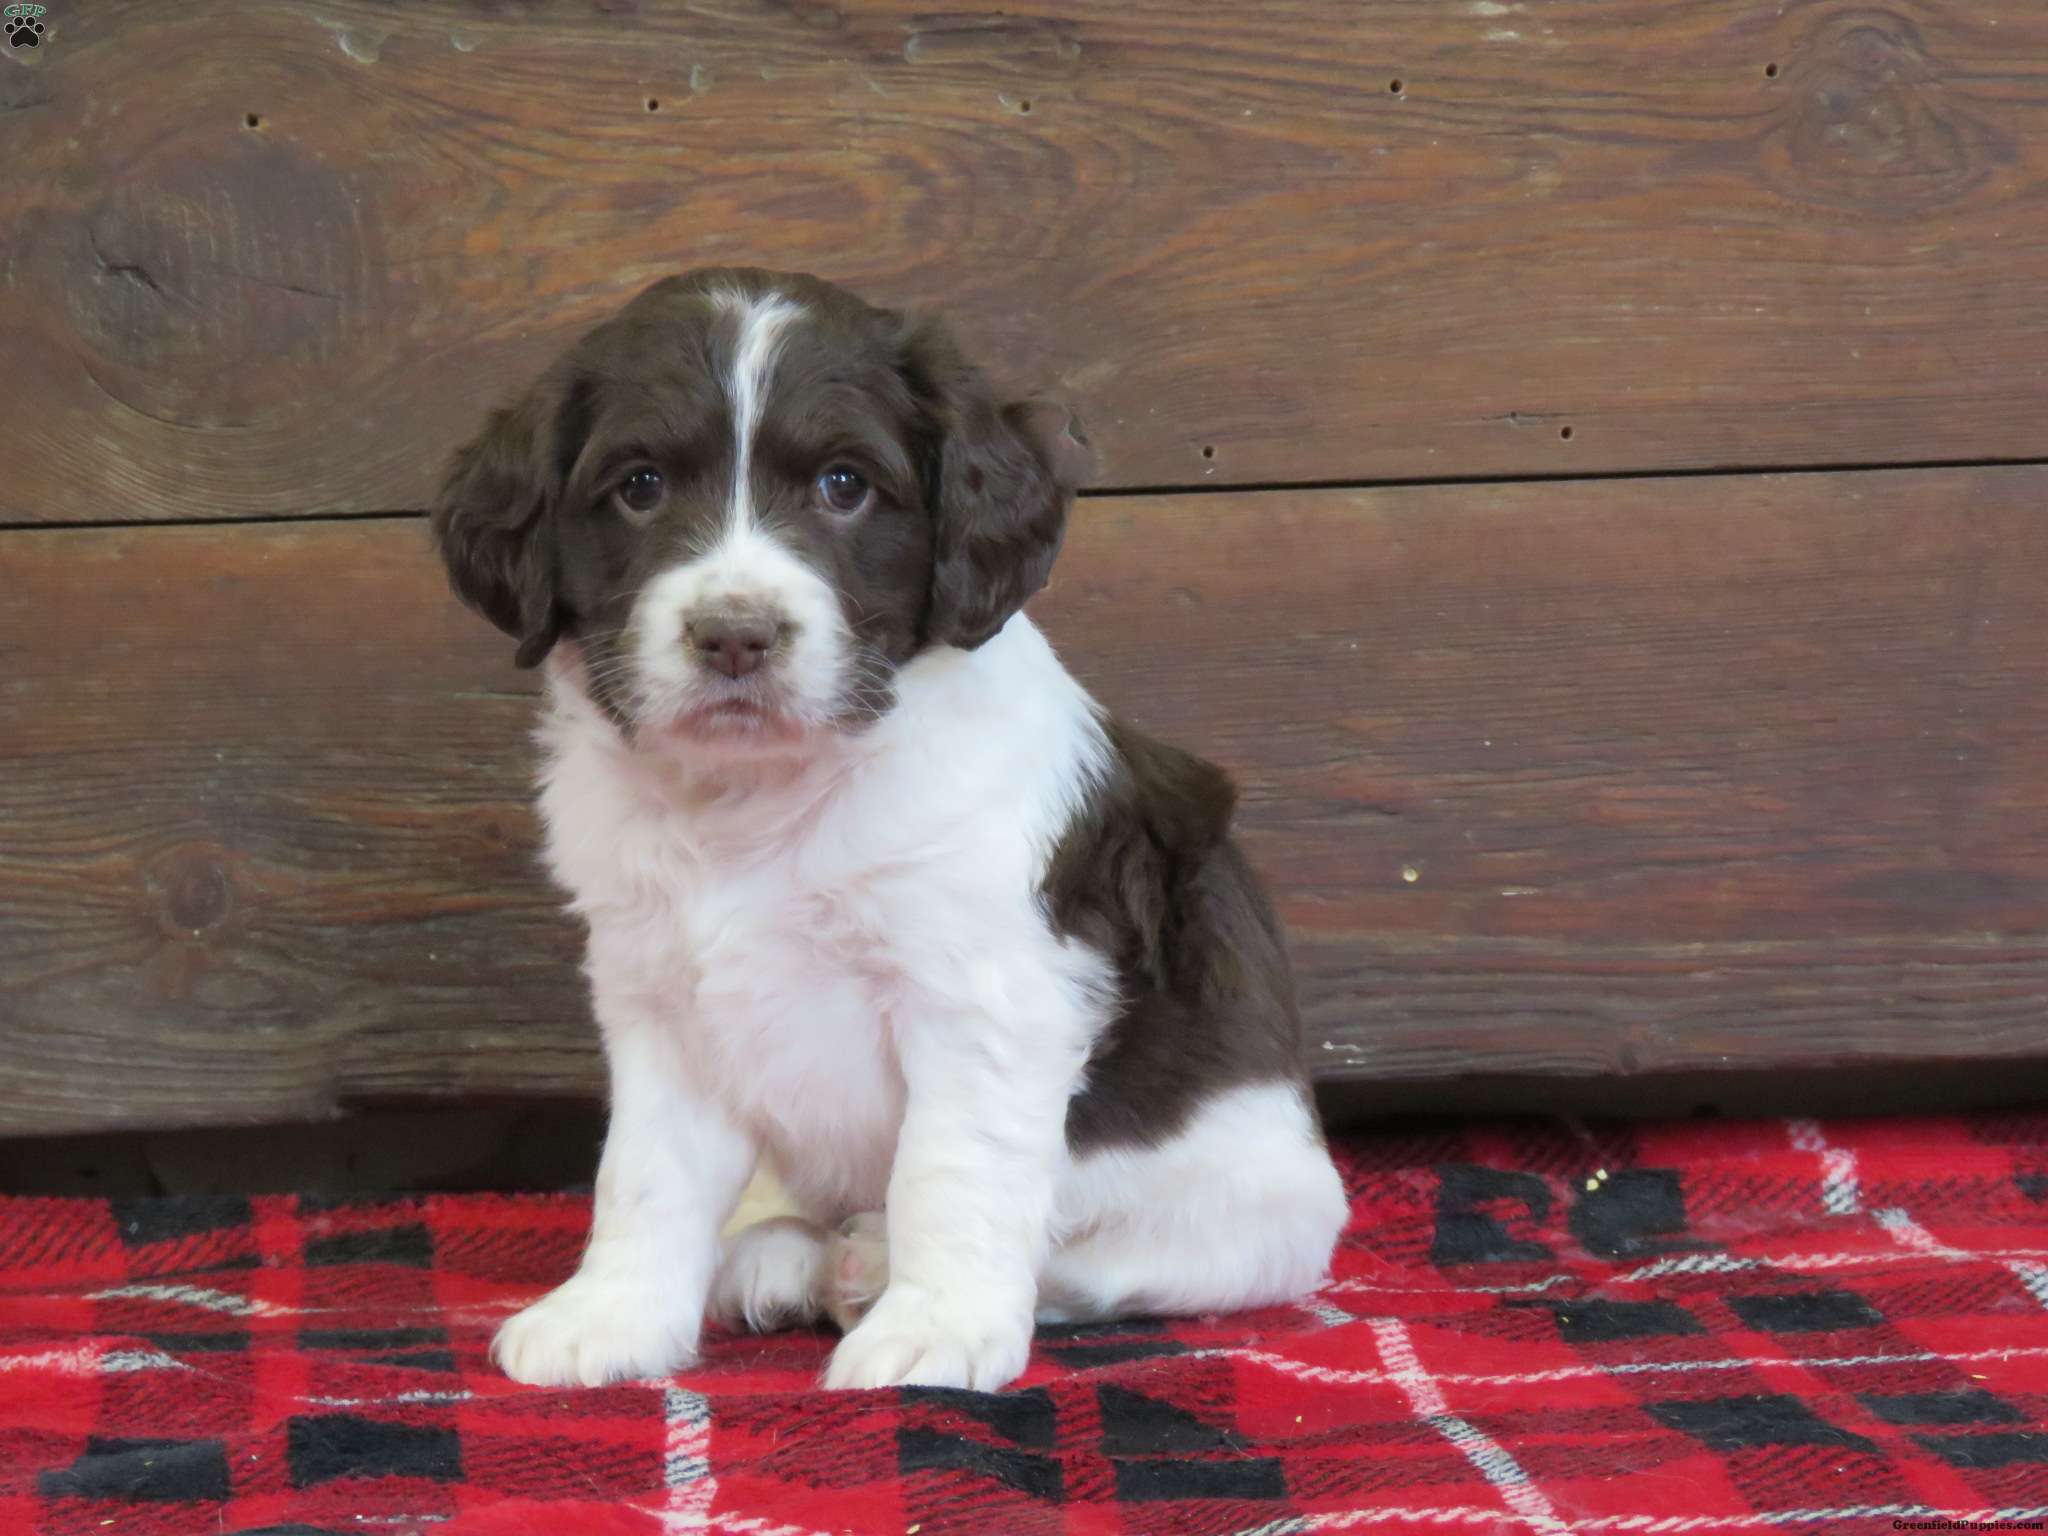 krystal aften udluftning English Springer Spaniel Mix Puppies for Sale | Greenfield Puppies